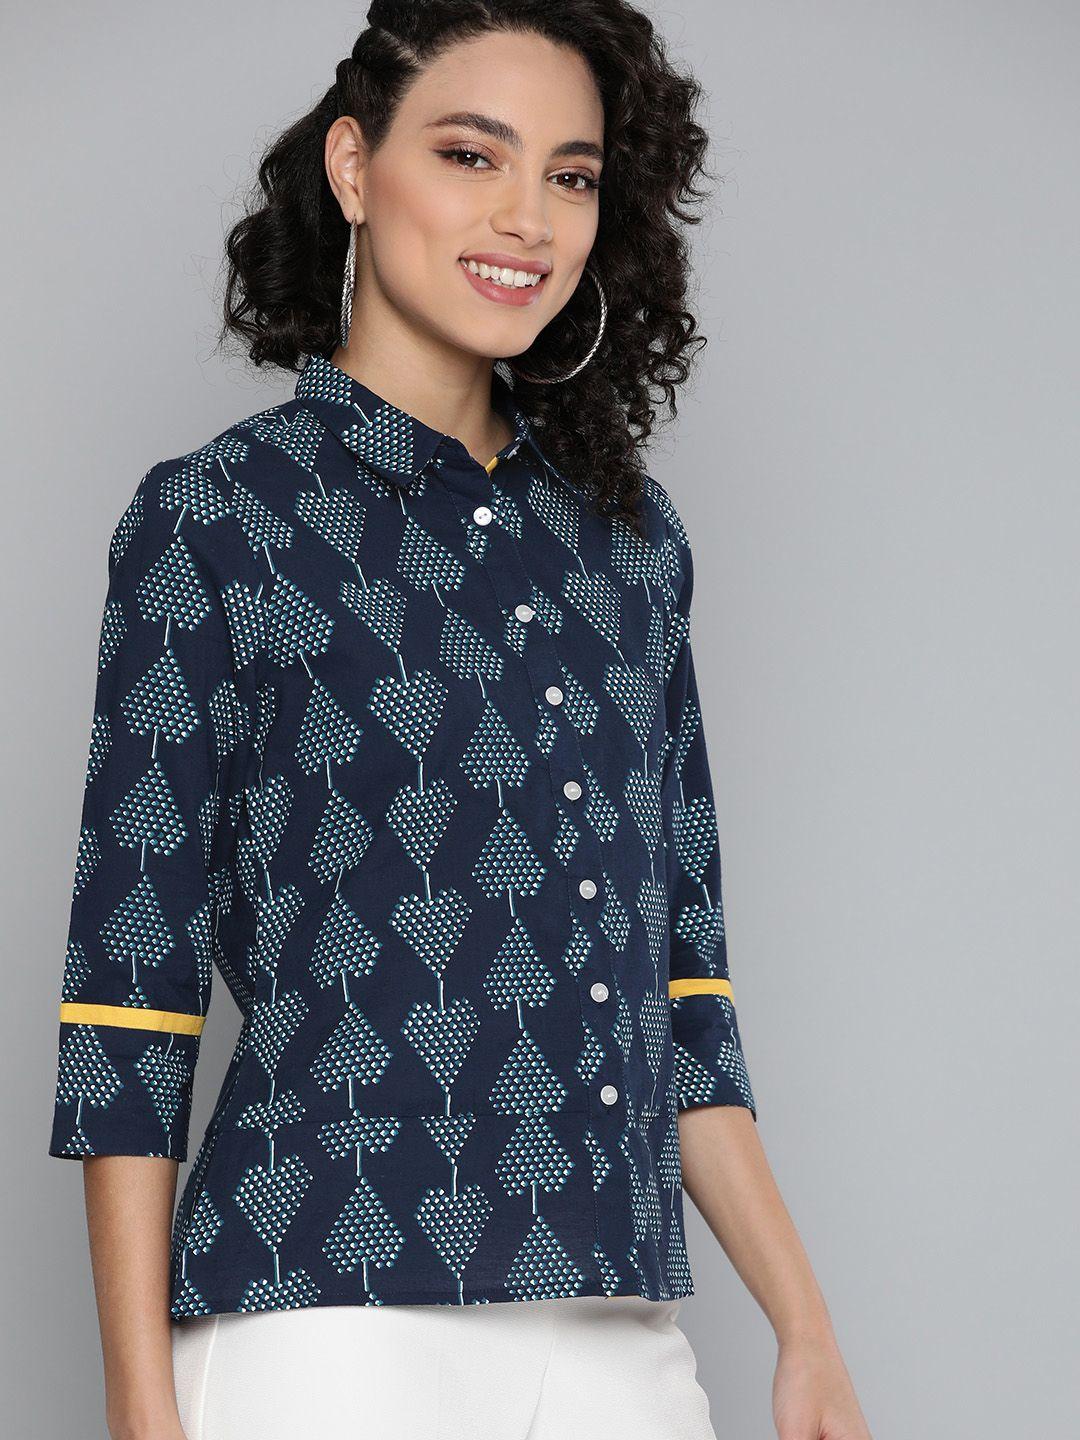 here&now women navy blue & white pure cotton heart shaped printed casual shirt